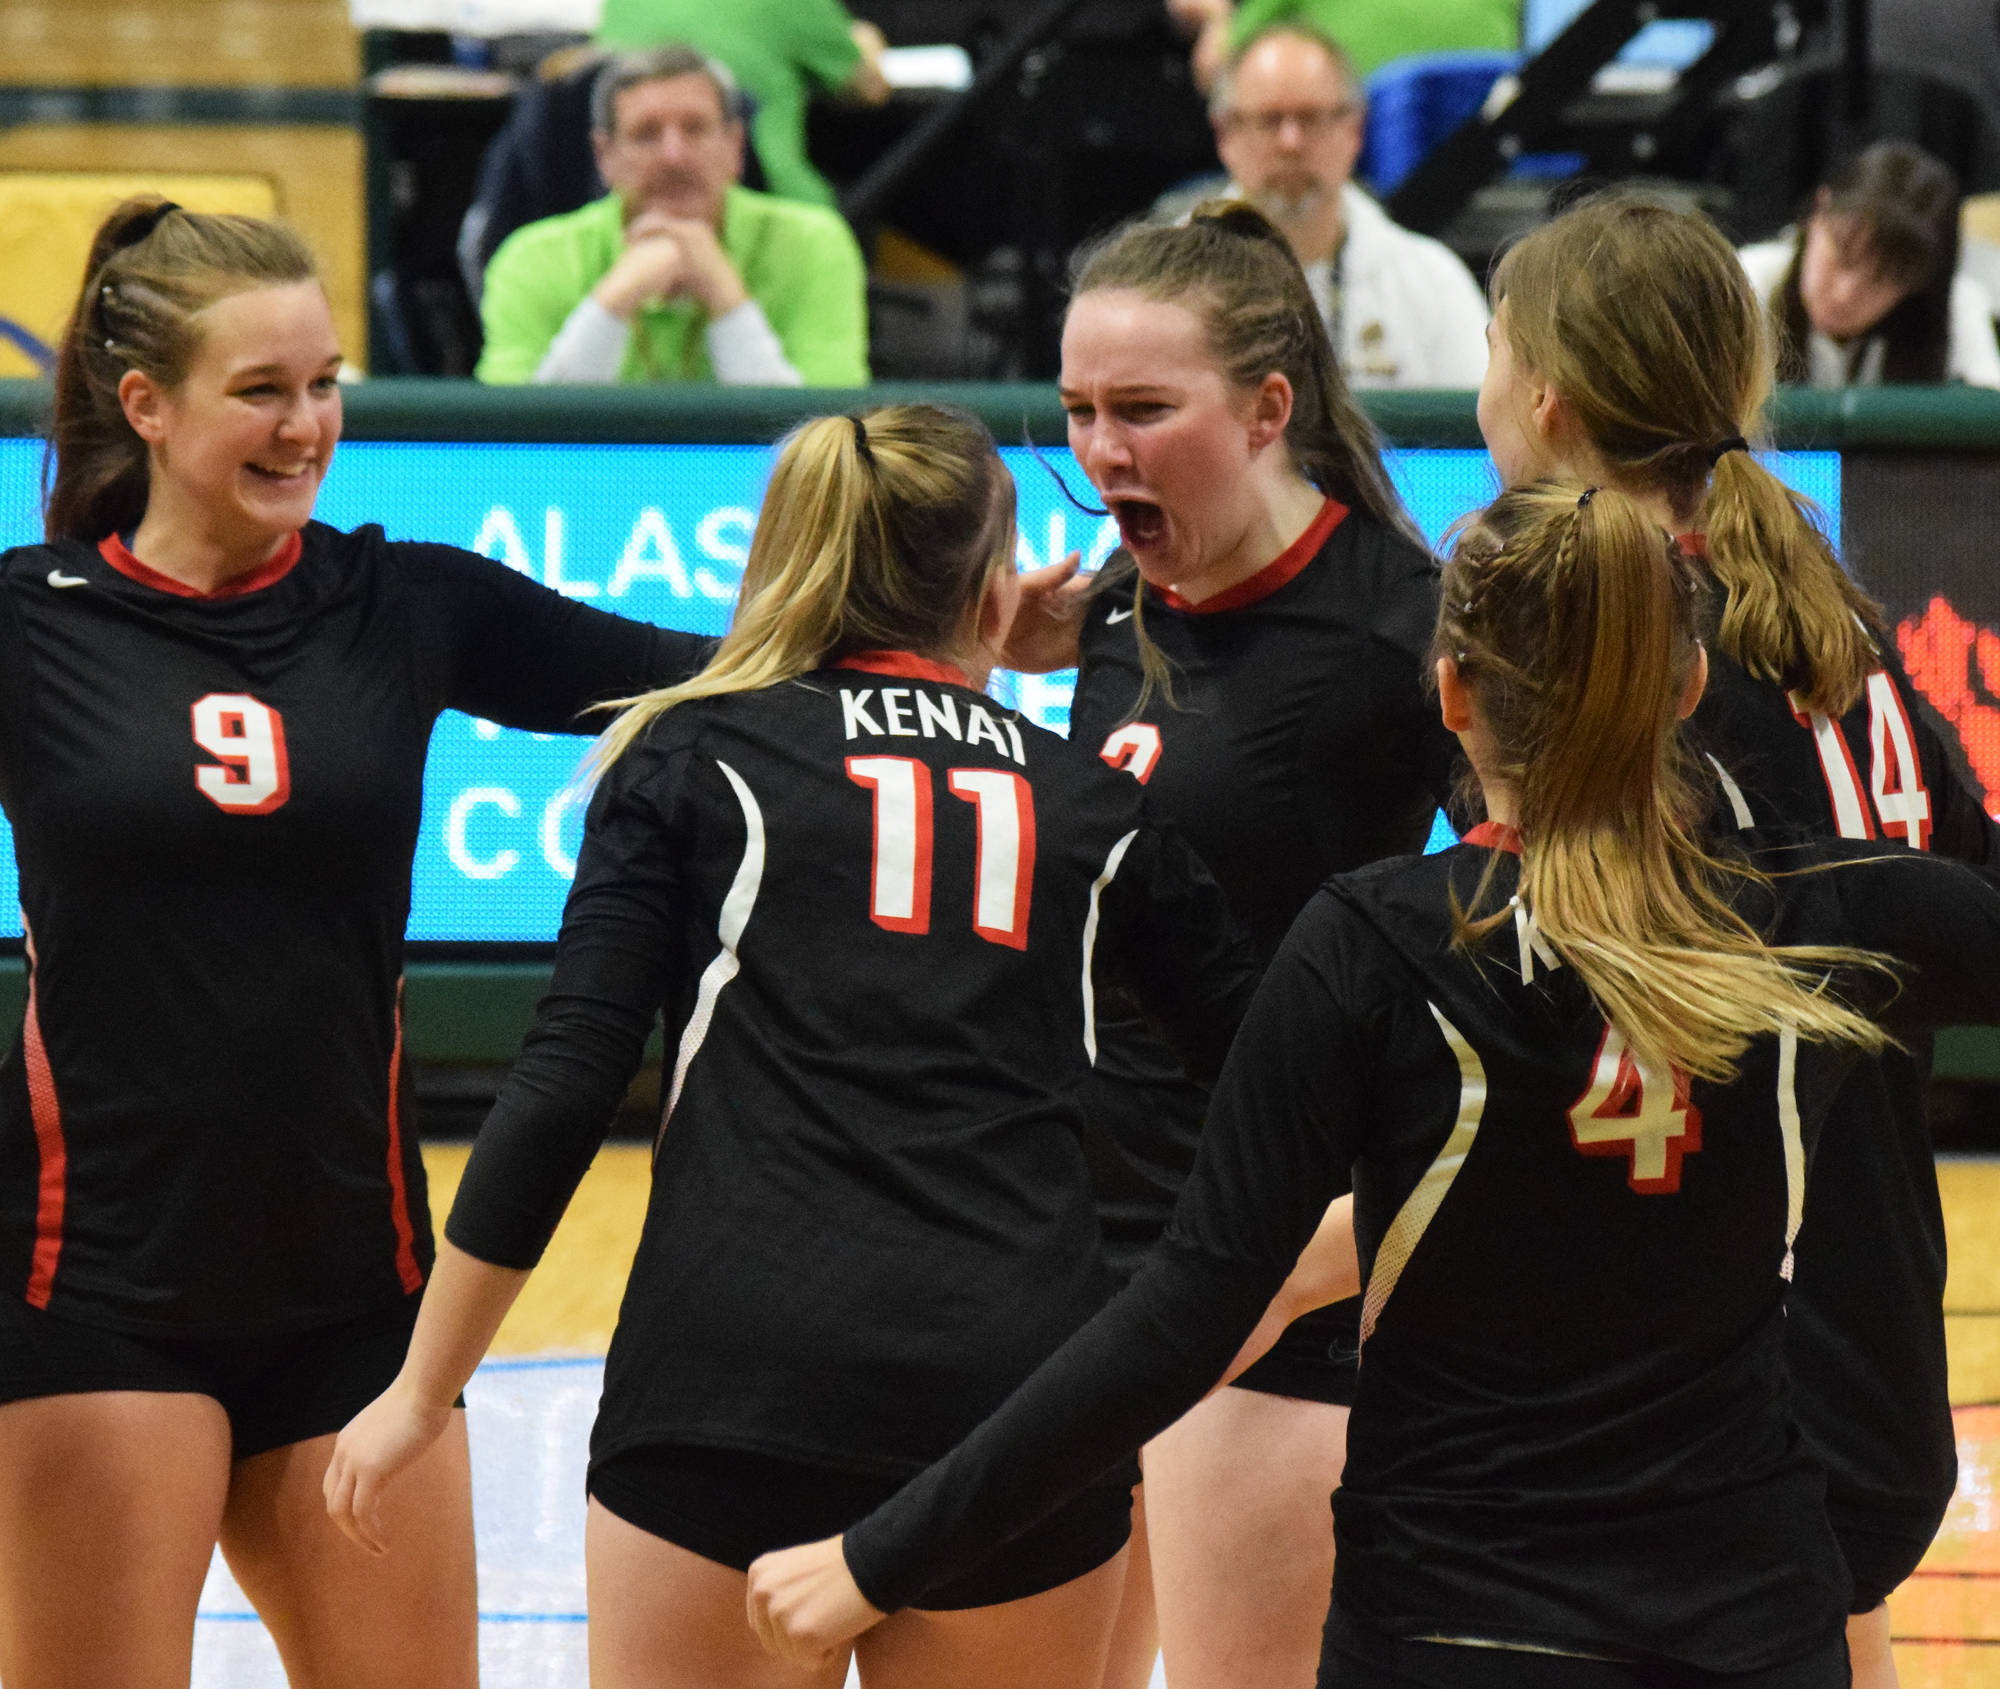 Kenai’s Bethany Morris gets her teammates fired up Friday, Nov. 15, 2019, against Nikiski at the Class 3A state volleyball tournament at the Alaska Airlines Center in Anchorage, Alaska. (Photo by Joey Klecka/Peninsula Clarion)